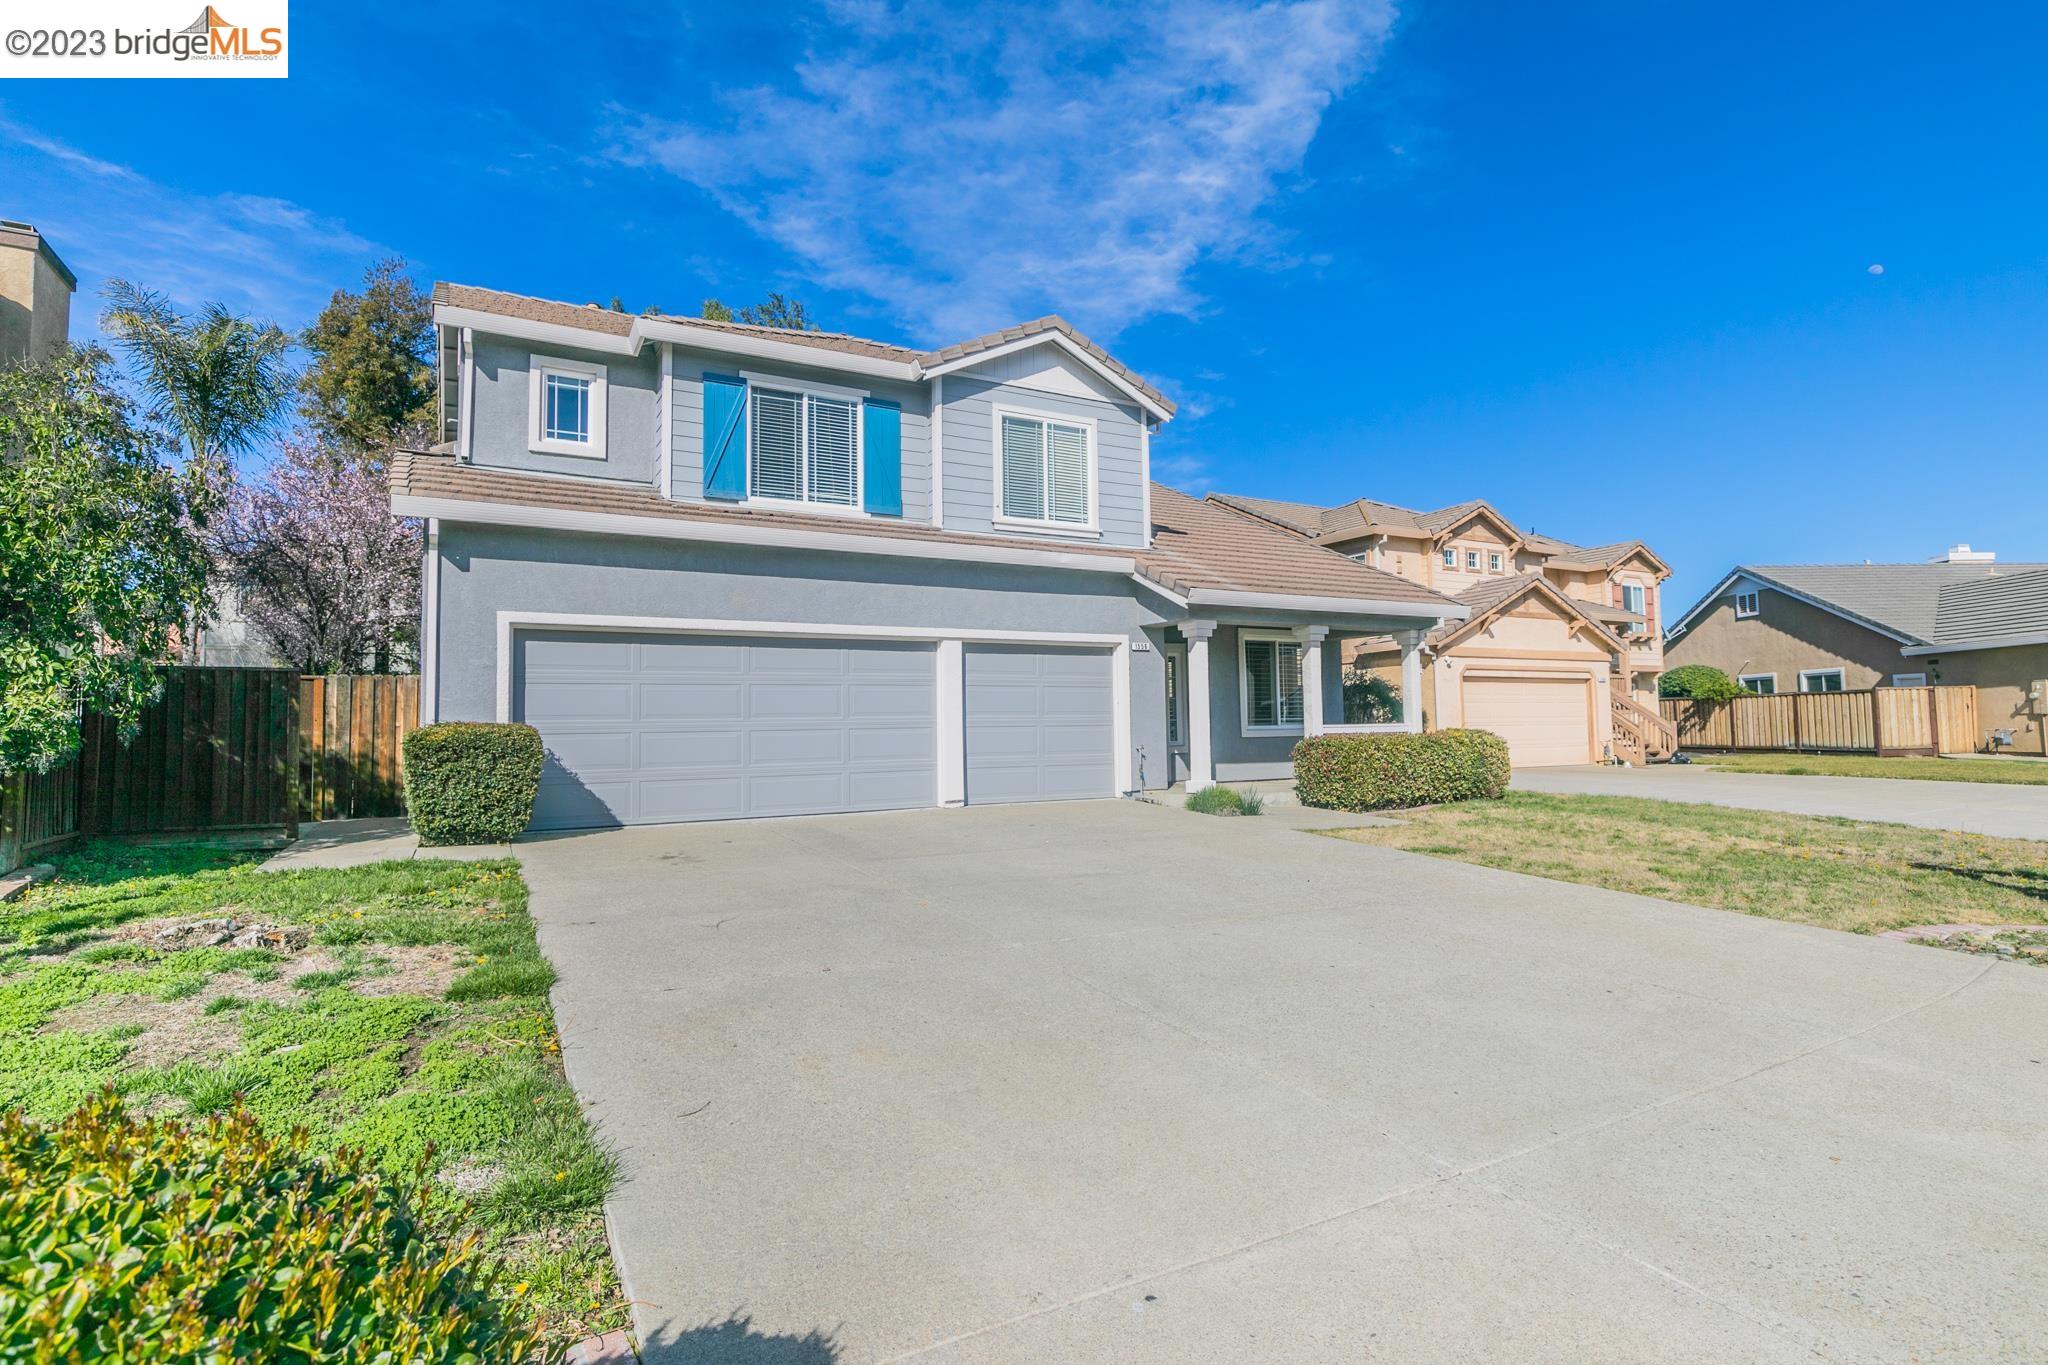 1556 Autumn Valley Way, Brentwood, CA 94513